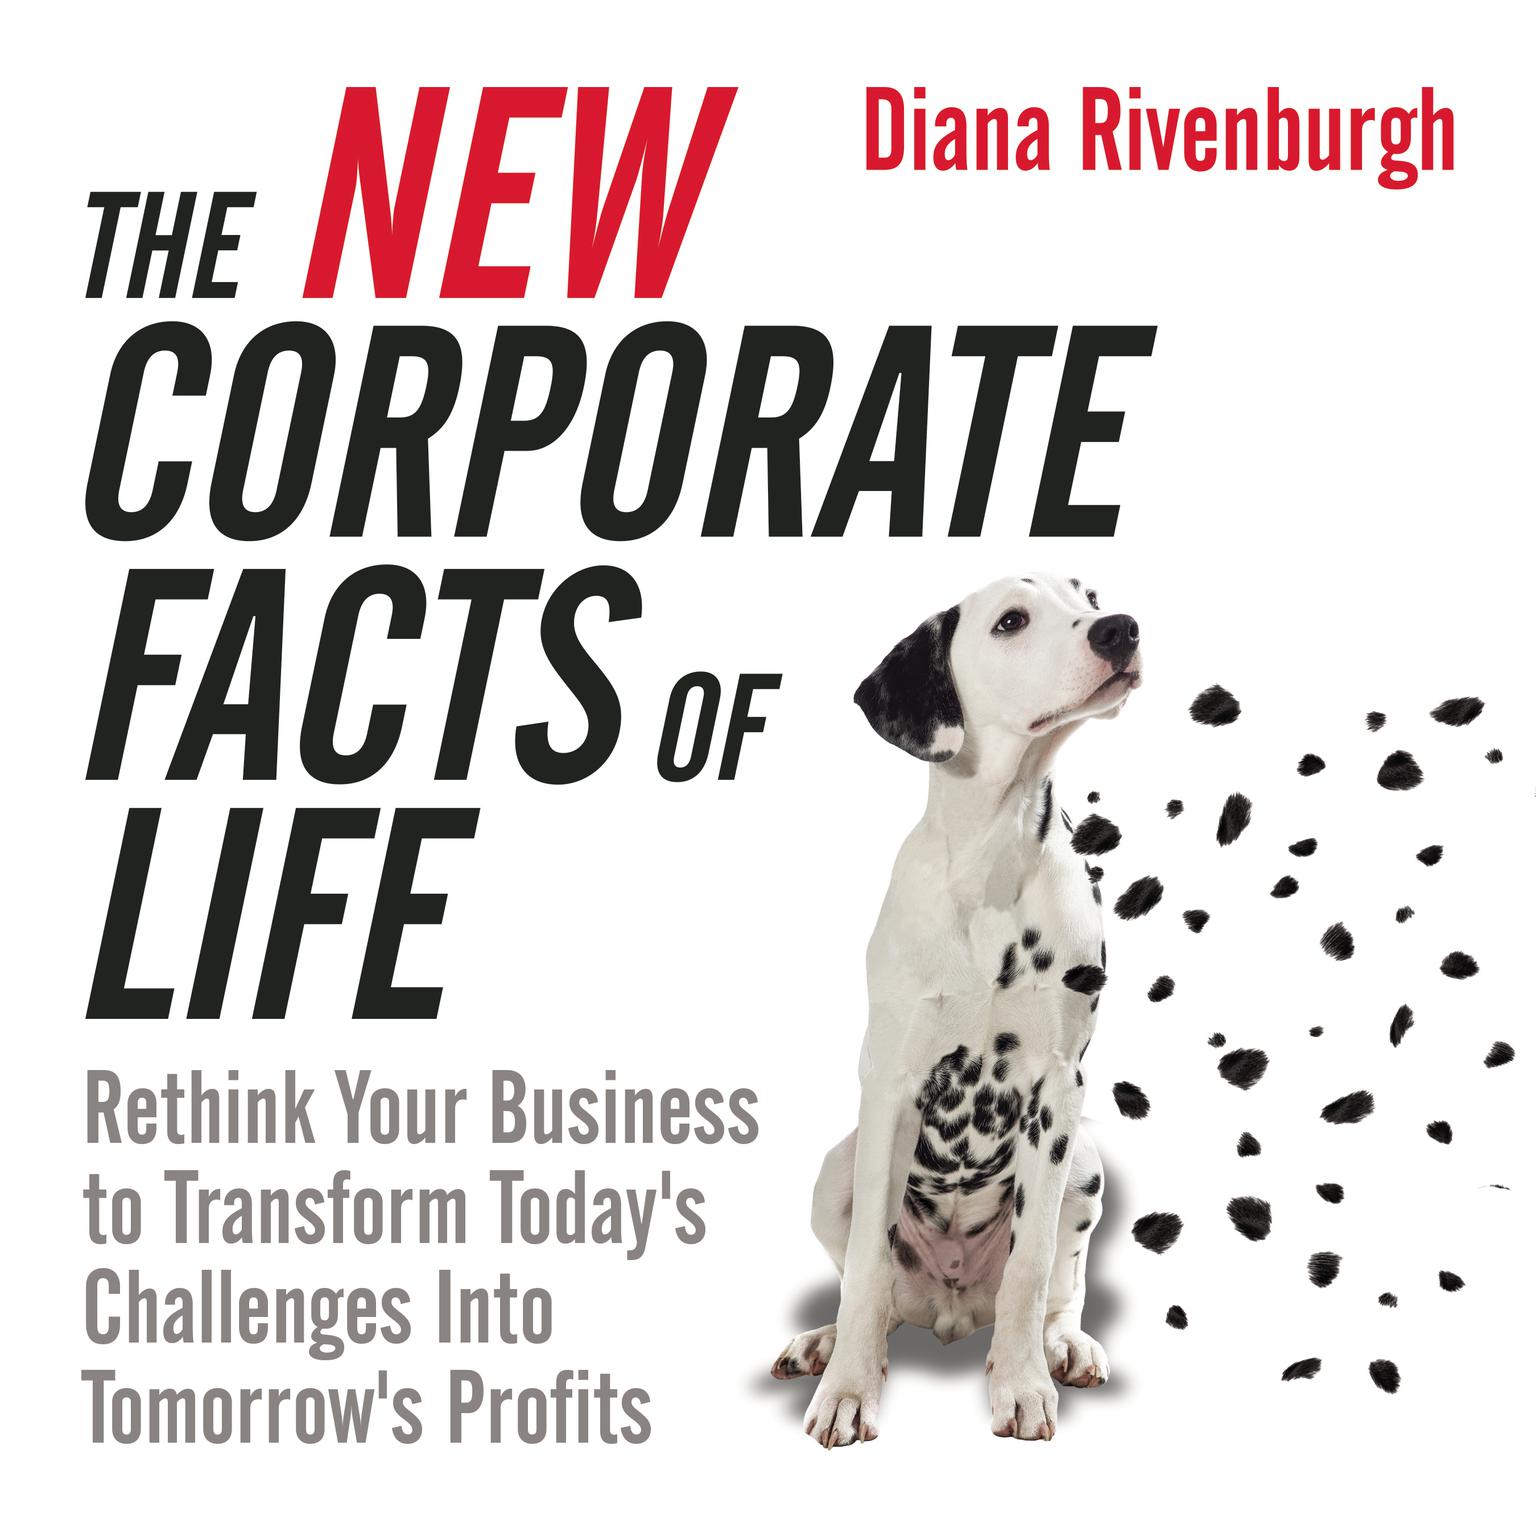 The New Corporate Facts Life: Rethink Your Business to Transform Todays Challenges into Tomorrows Profits Audiobook, by Diana Rivenburgh